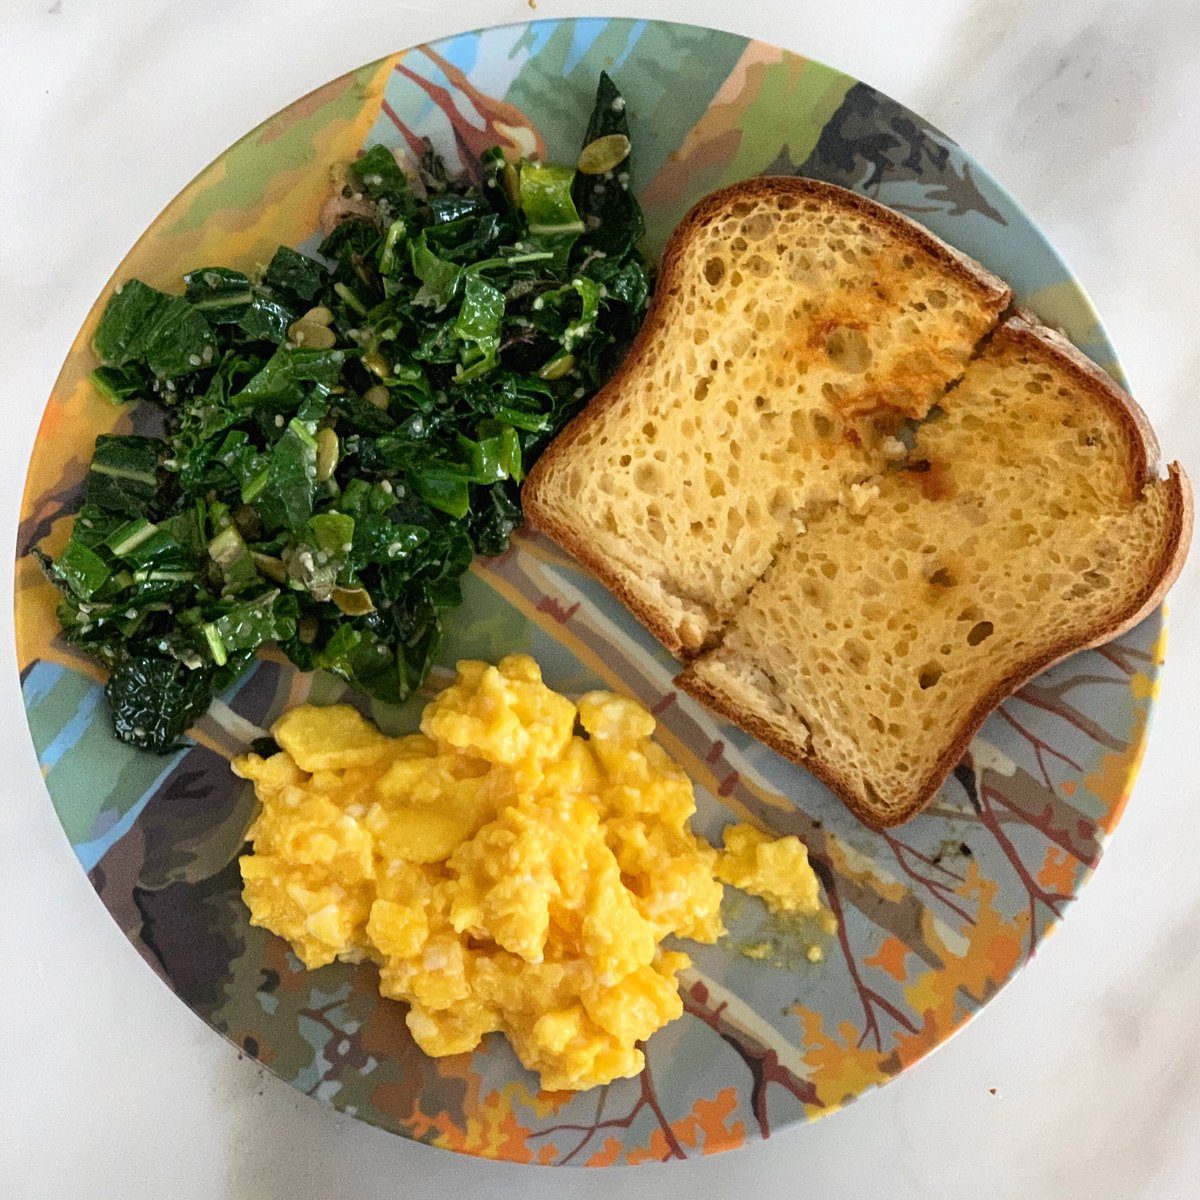 Sunday Breakfast ???? with kale from my farm stand! Get the recipe details in my IG story. https://t.co/wQxSgkBPwF